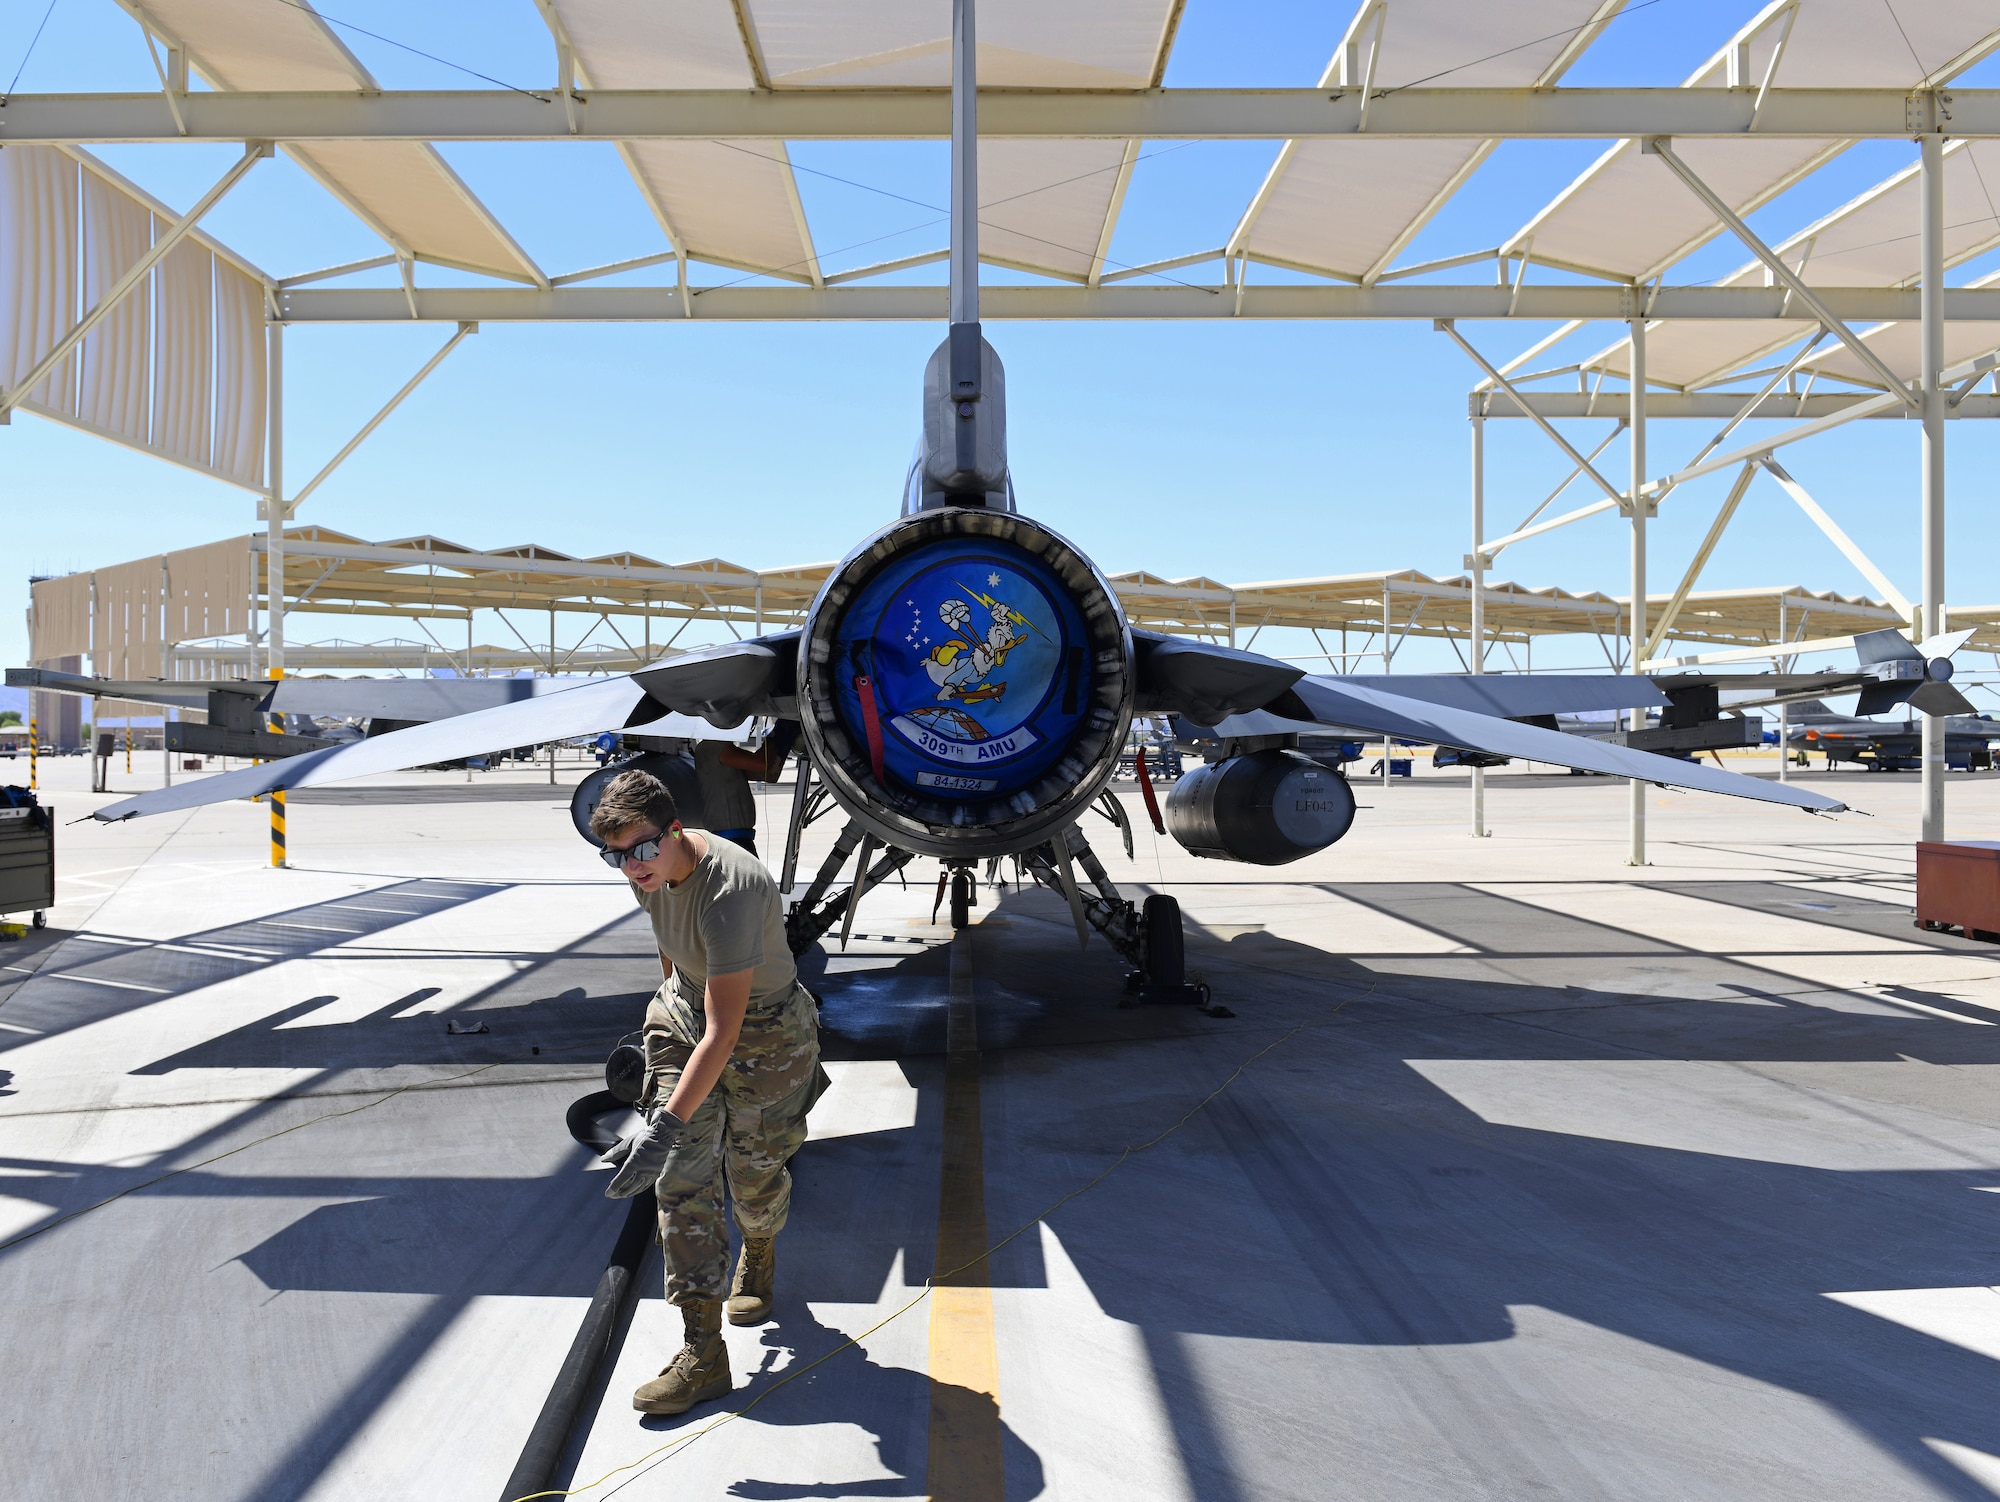 Airman 1st Class Katlynn Masnyk, 56th Logistics Readiness Squadron distribution fuels operator, drags a hose after she finishes refueling an F-16 Fighting Falcon from the 309th Fighter Squadron Aug. 21, 2019, at Luke Air Force Base, Ariz.